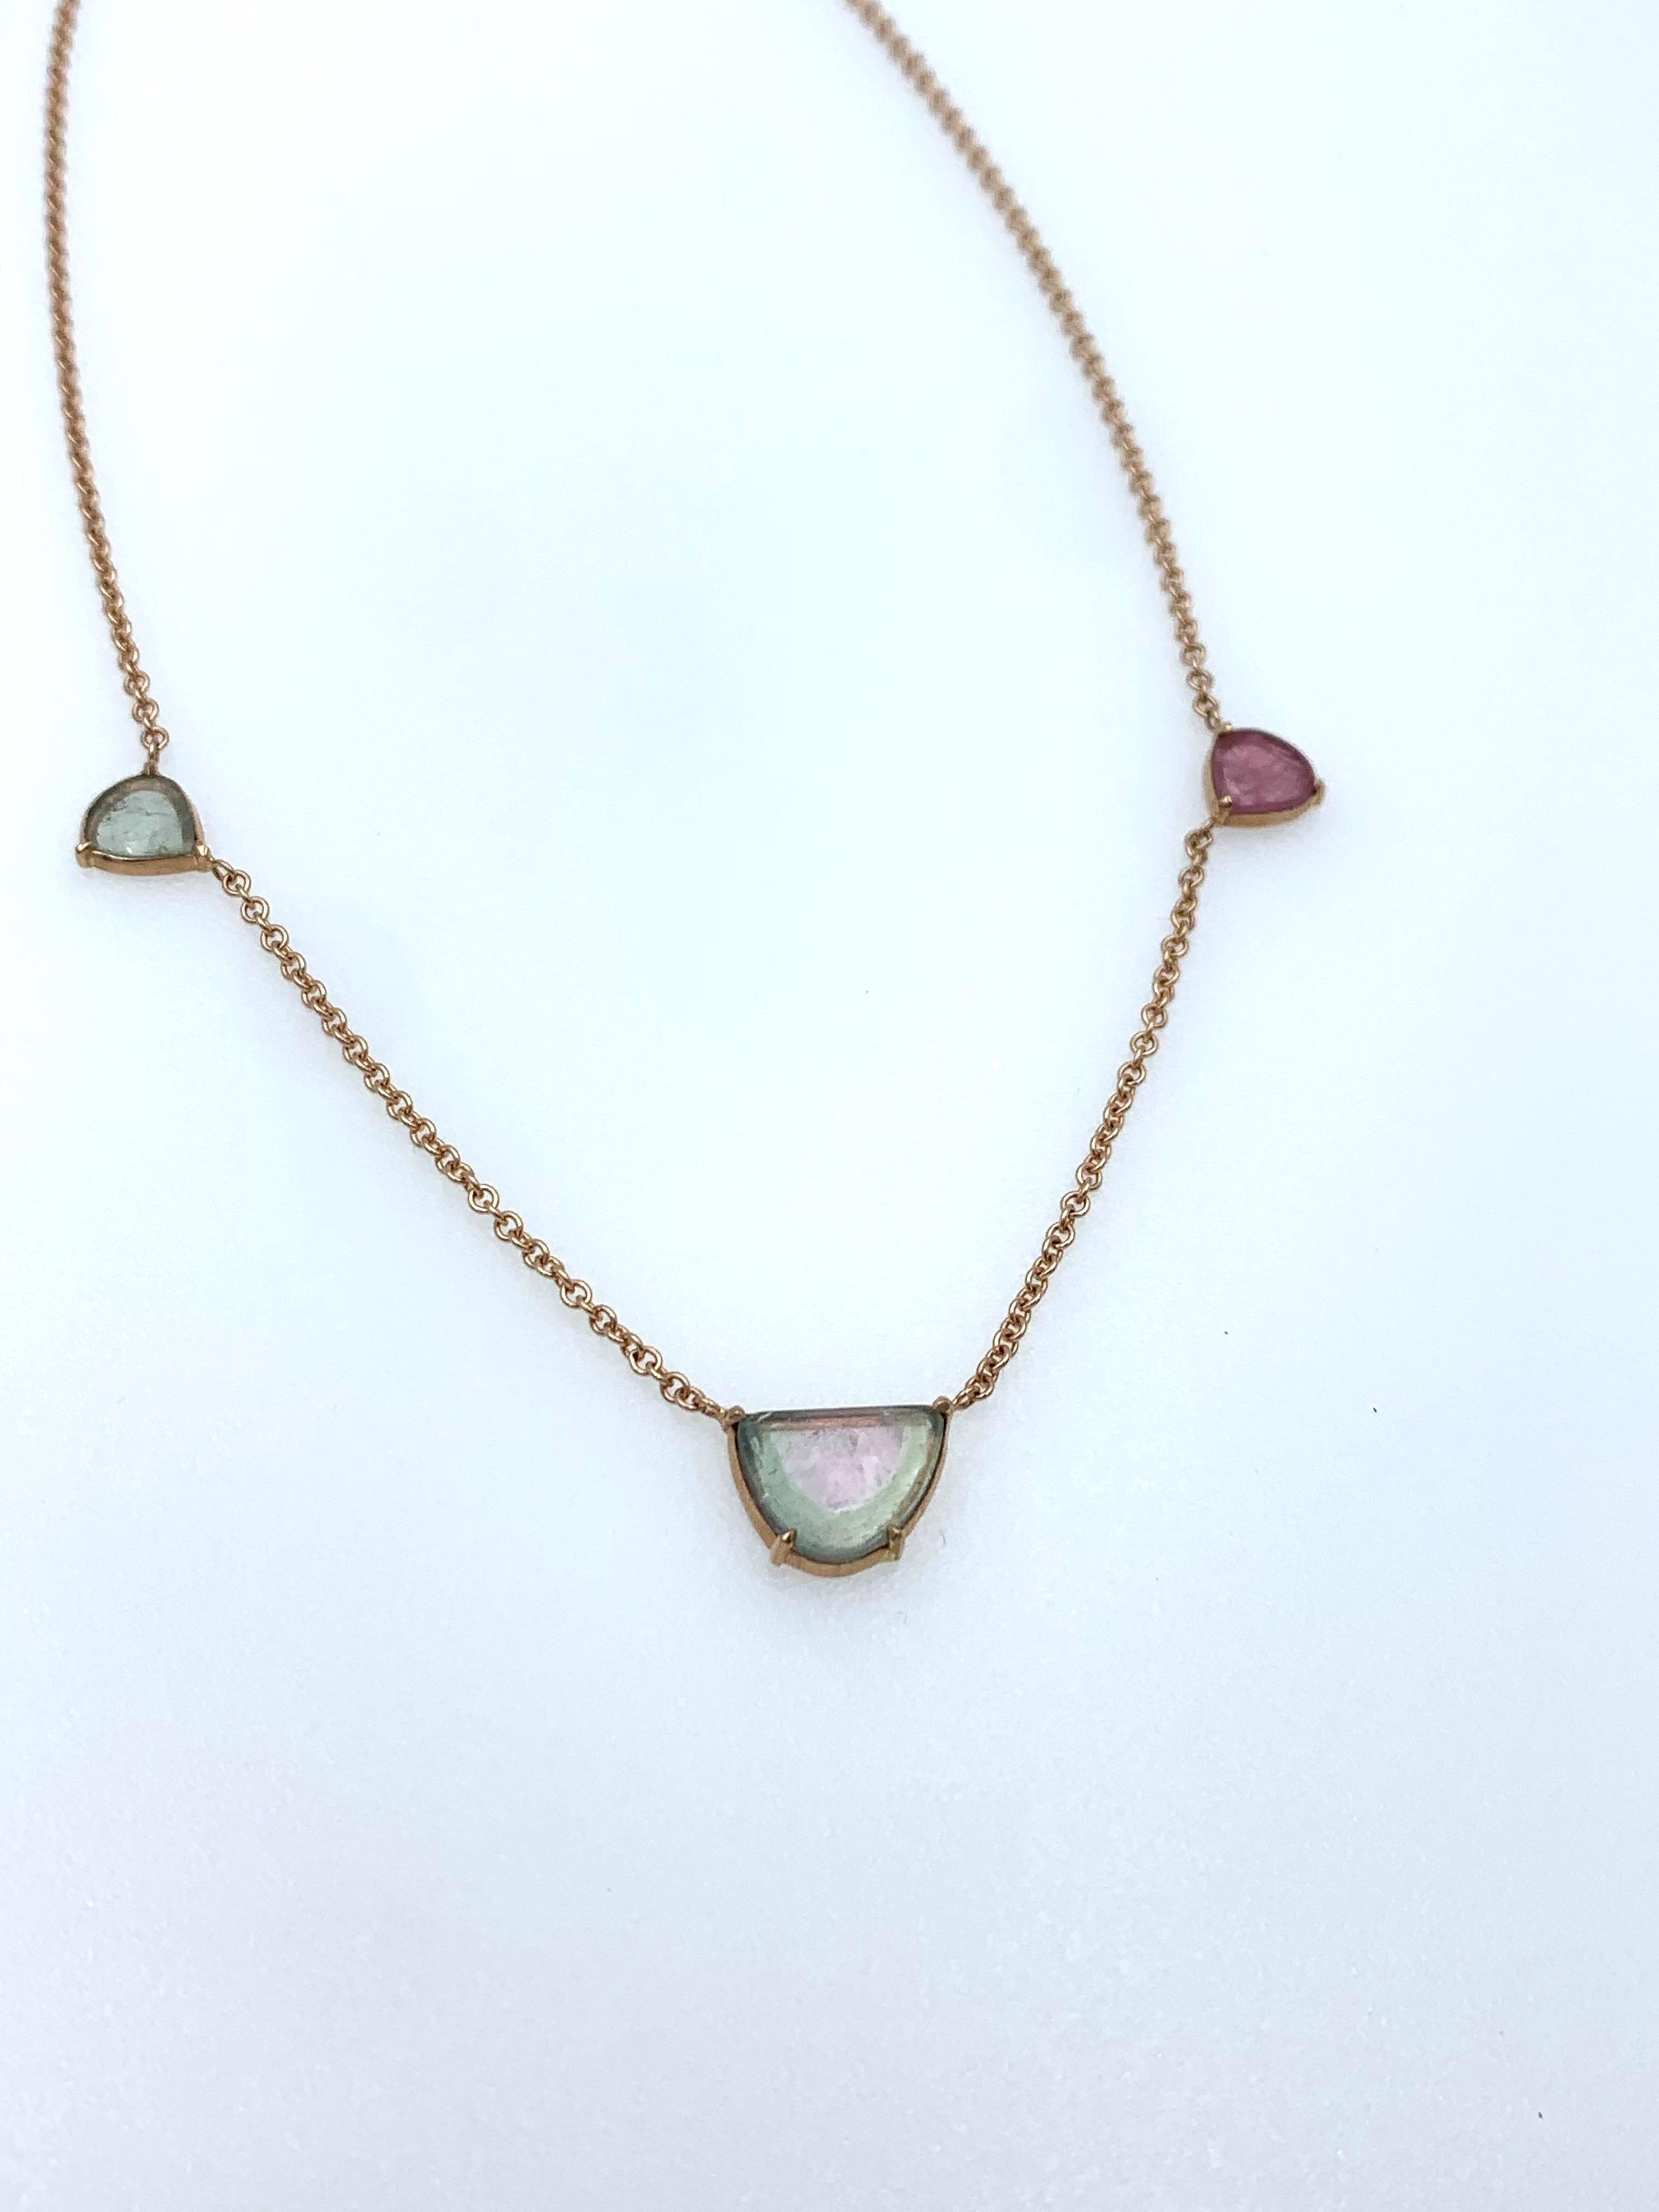 Hand made in 9 karat rose gold with a Watermelon Tourmaline centre stone and two additional Tourmaline slices to each side, one in green and one in pink. The idea behind these designs are that you can layer the necklaces without loosing site of all